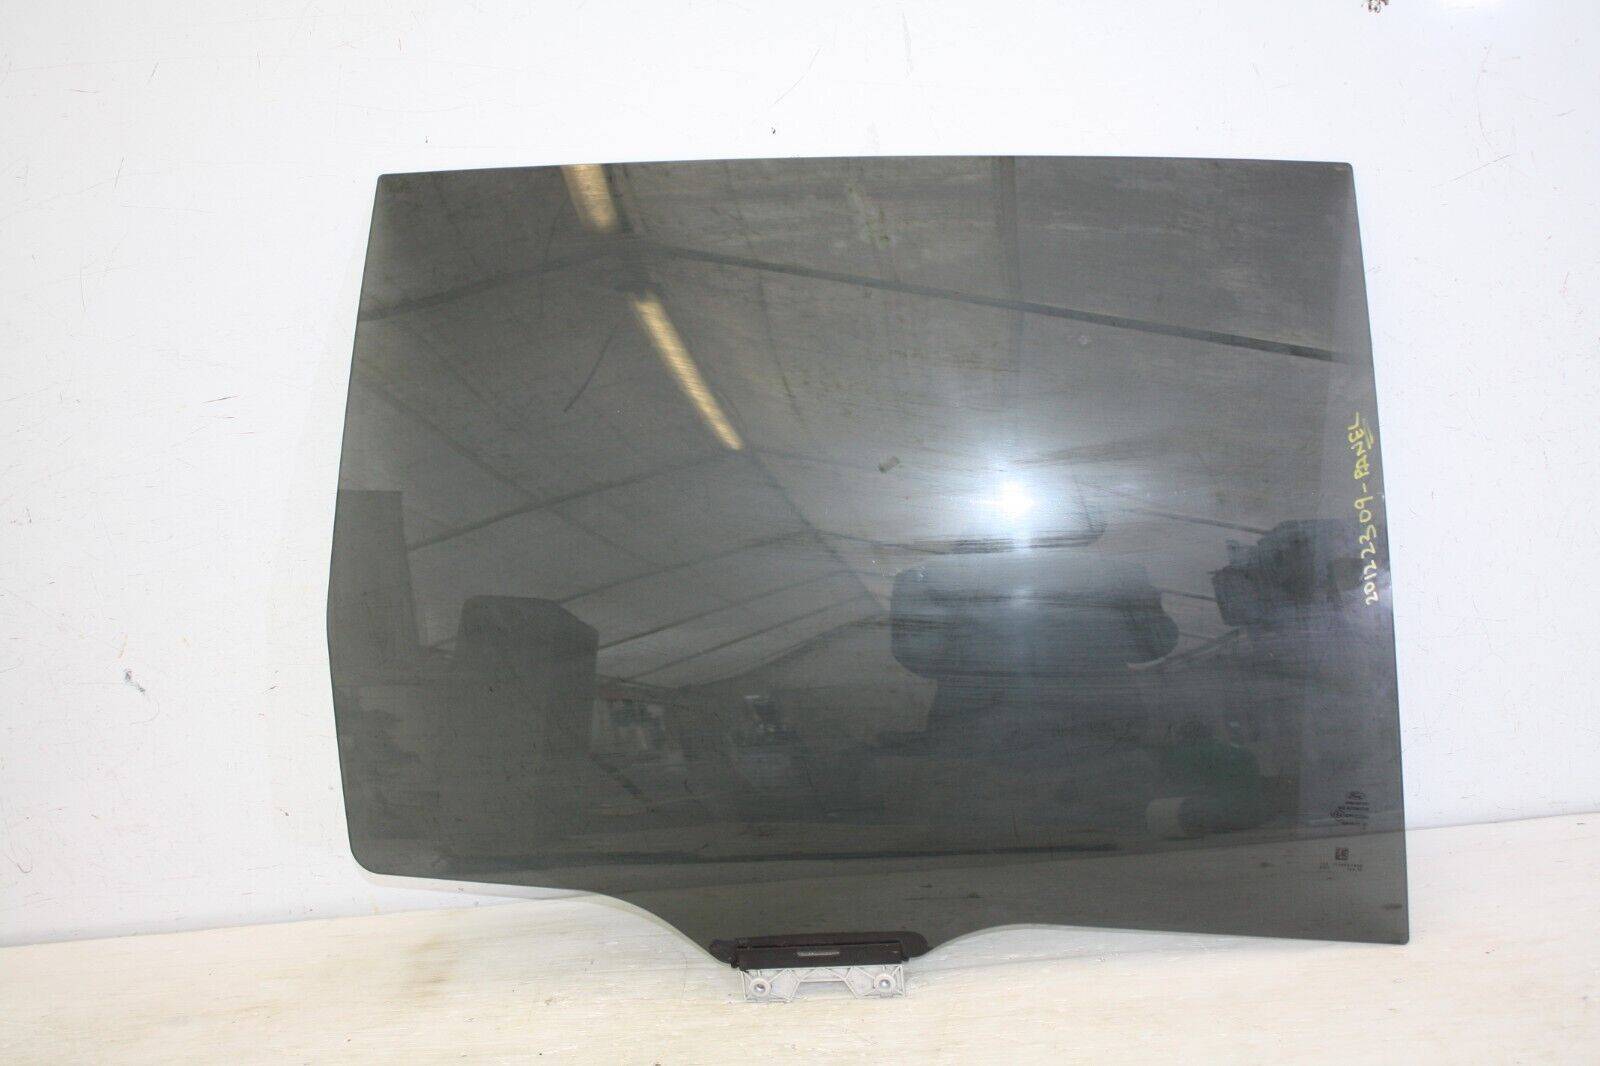 Ford-S-Max-Rear-Right-Side-Door-Glass-EM2B-R25712-A-genuine-176134766445